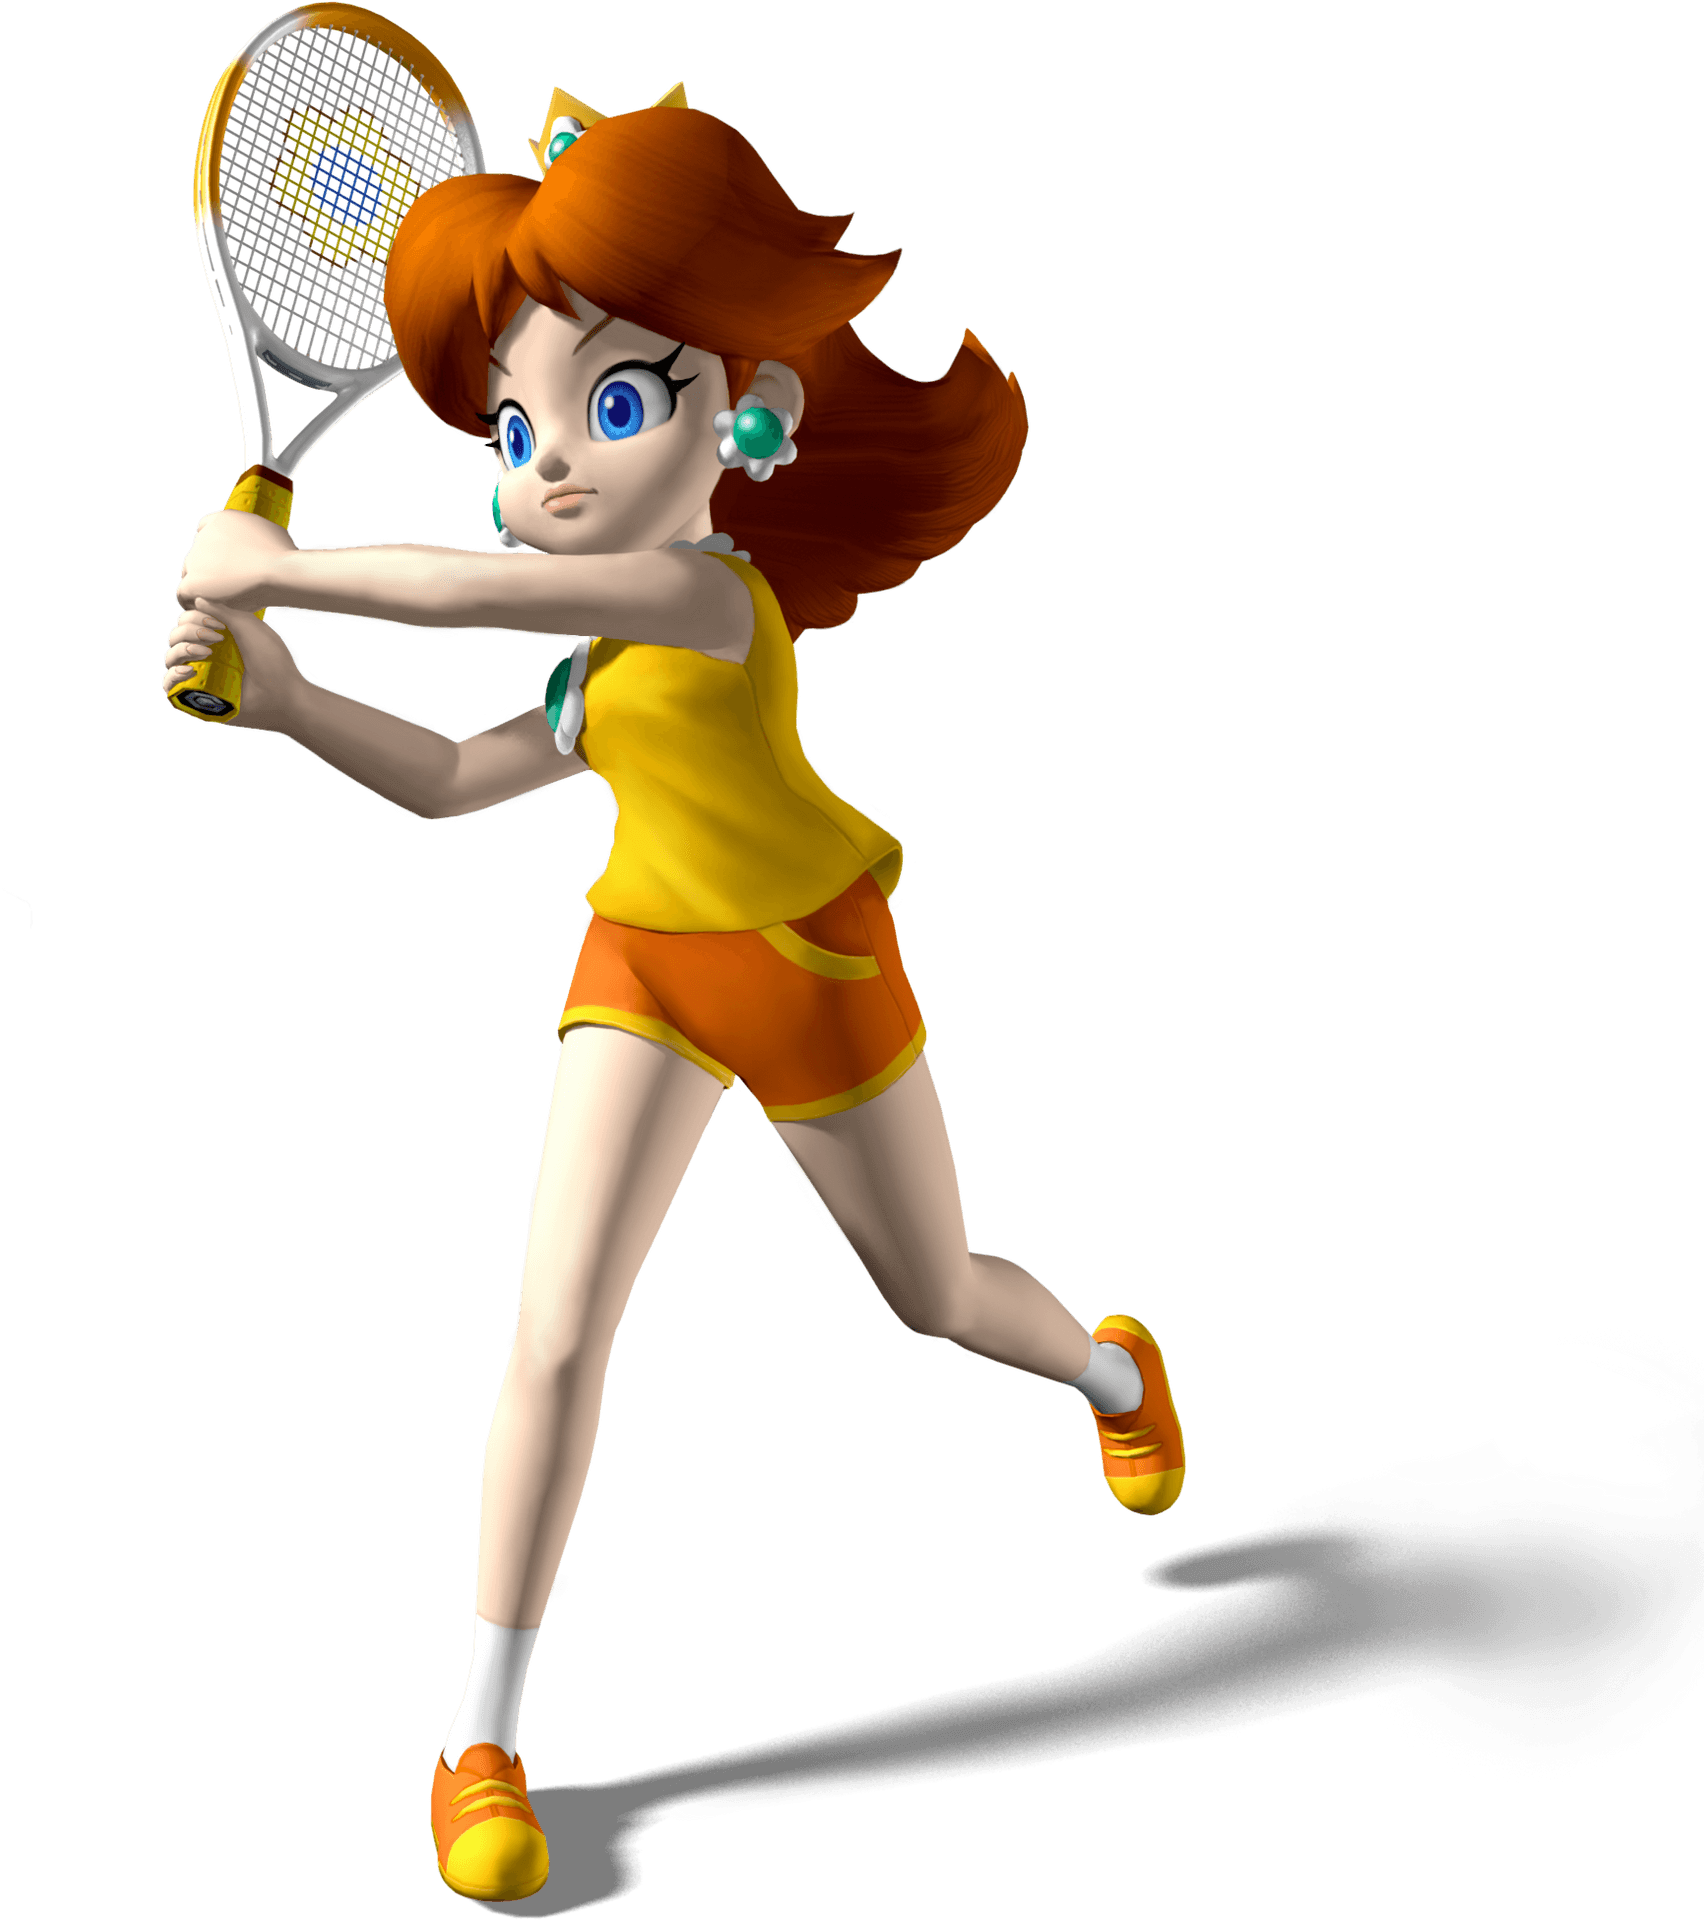 Animated Tennis Player Action Pose PNG image